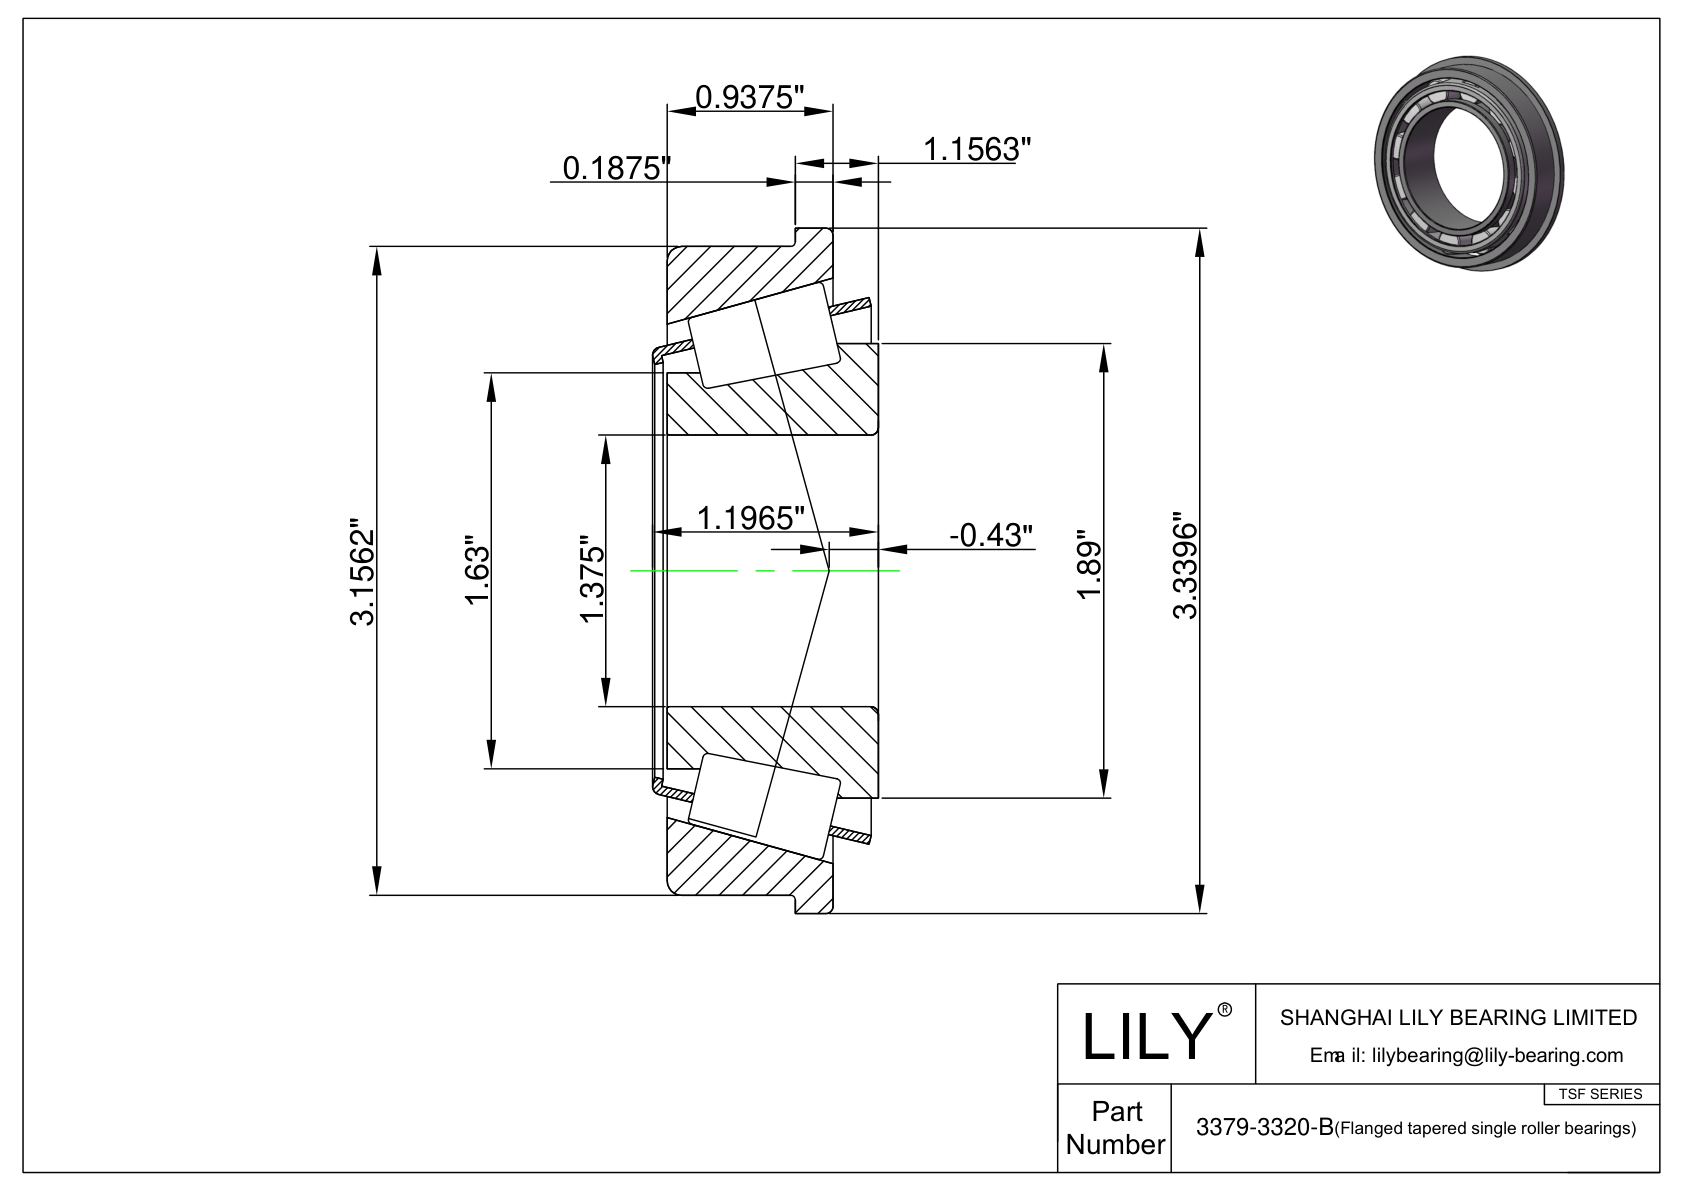 3379-3320-B TSF (Tapered Single Roller Bearings with Flange) (Imperial) cad drawing